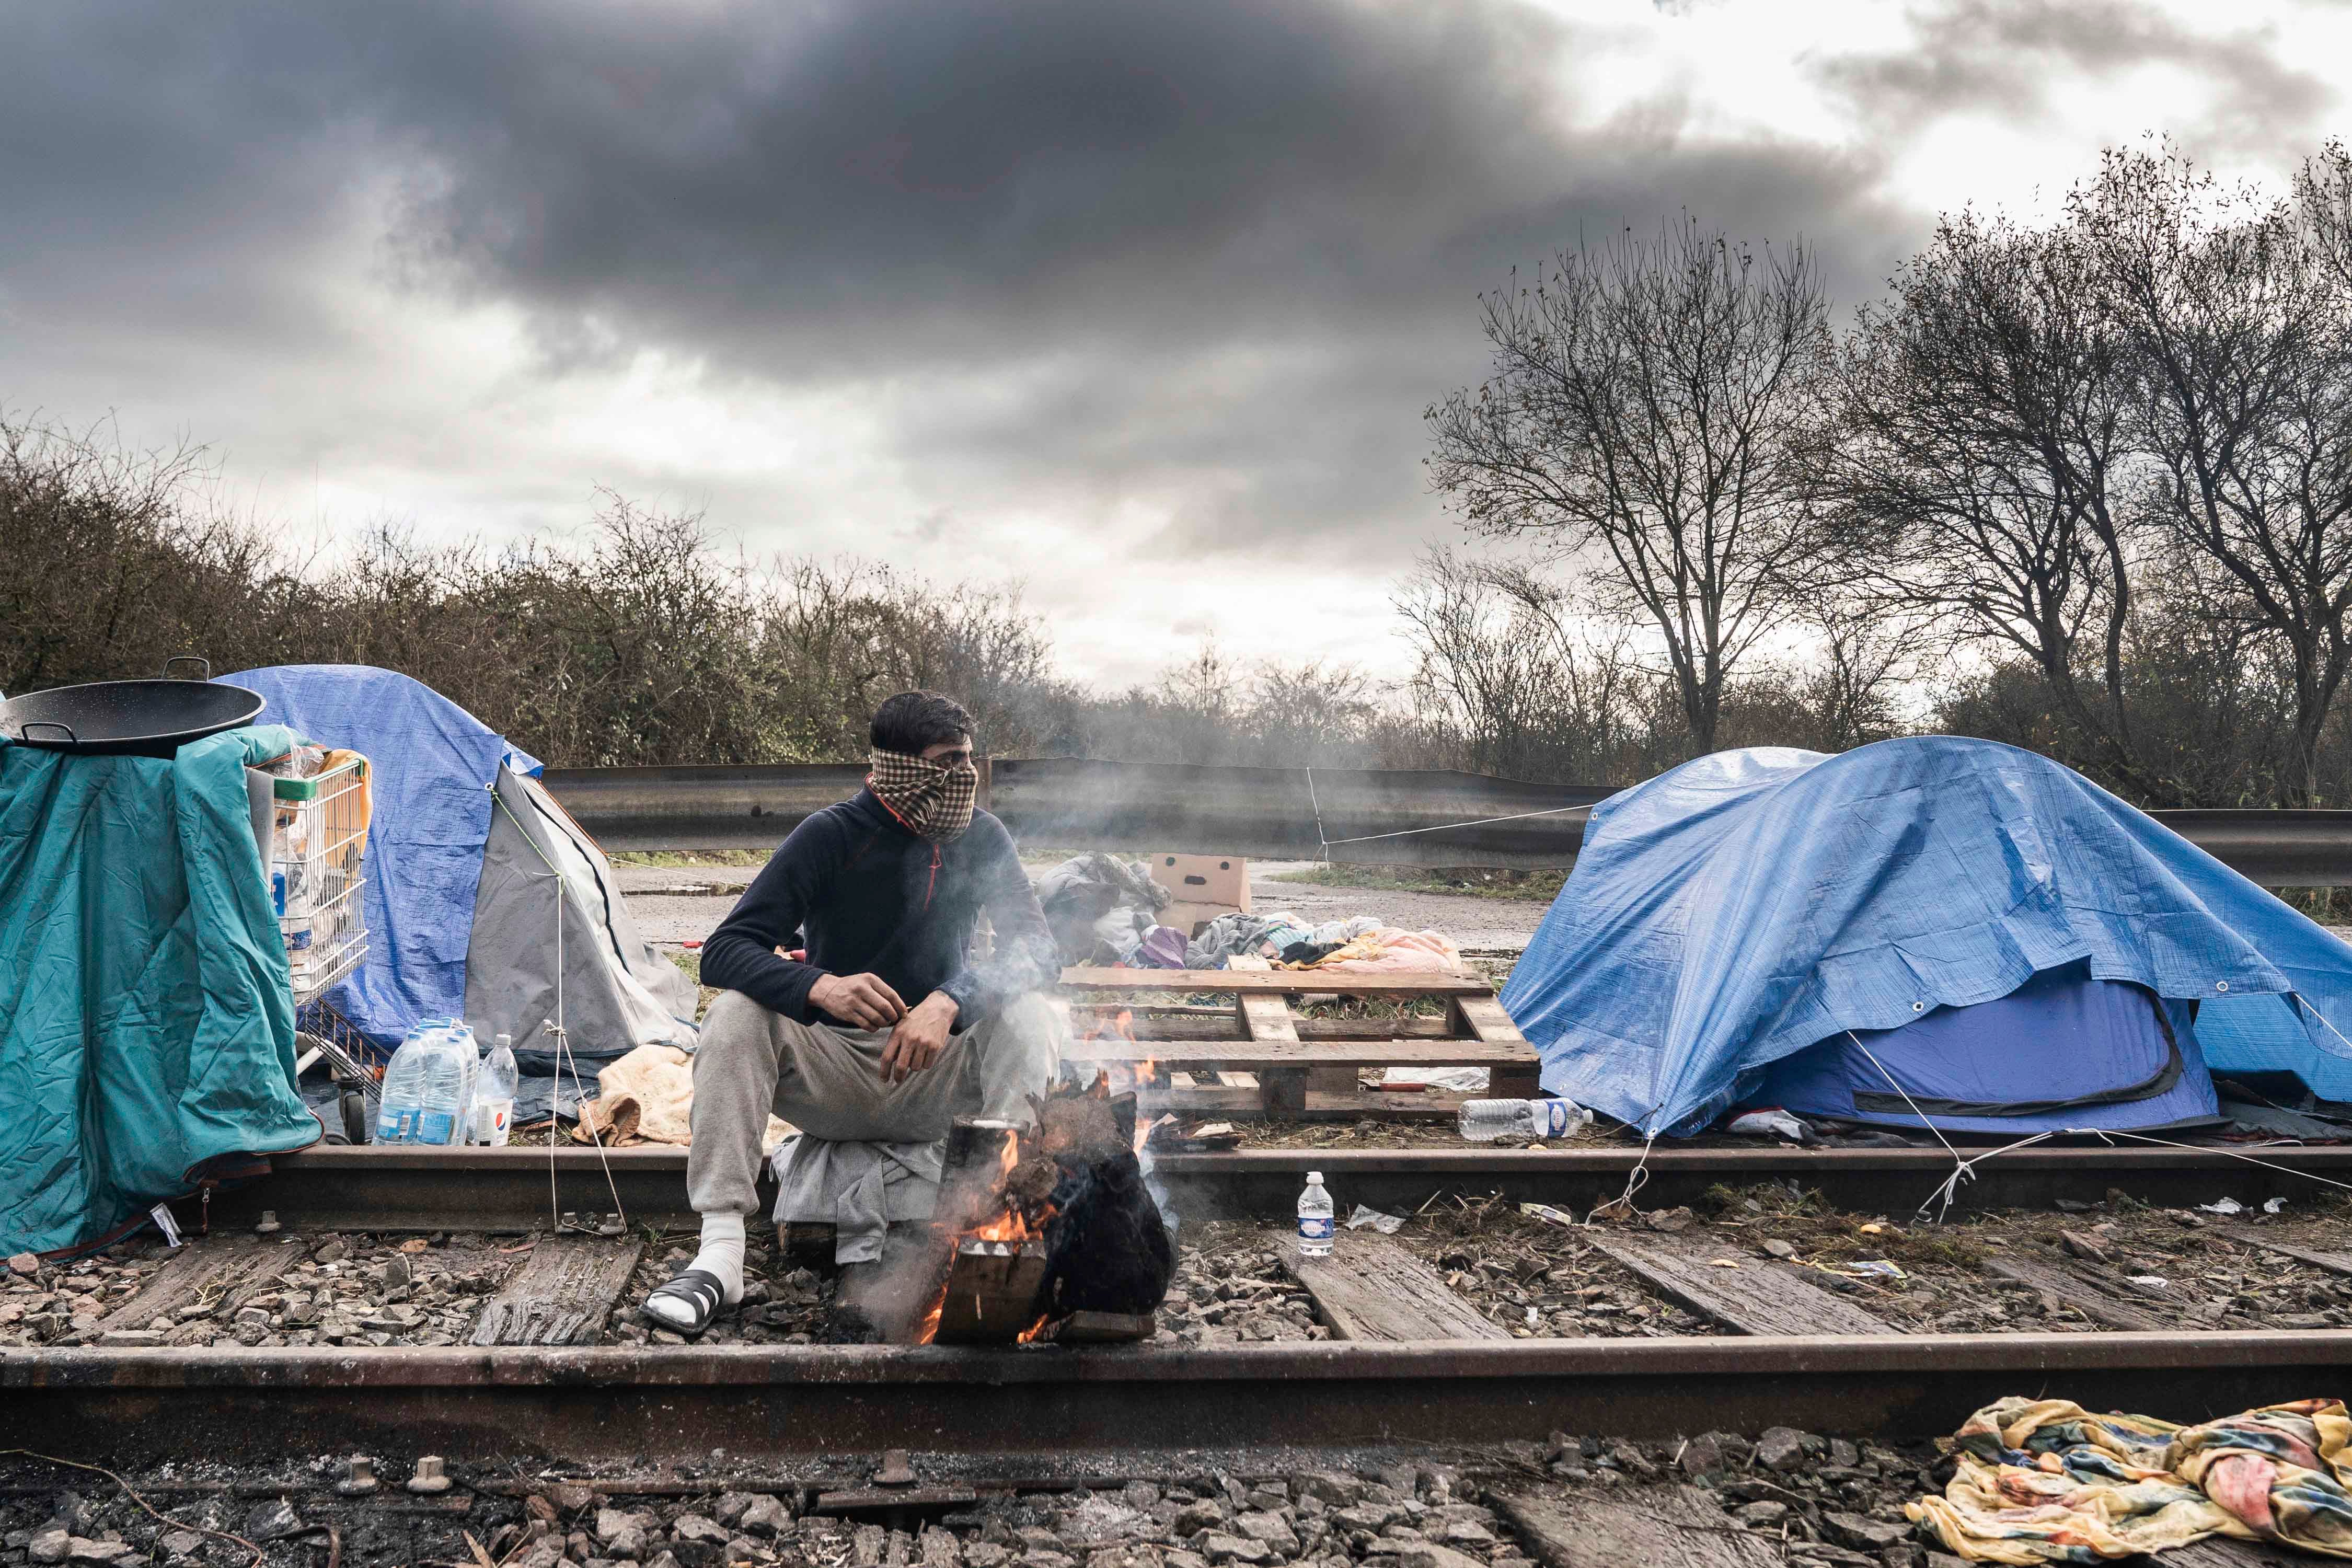 A migrant seen keeping himself warm by burning firewood at a makeshift migrant camp in the Dunkirk area of Northern France.